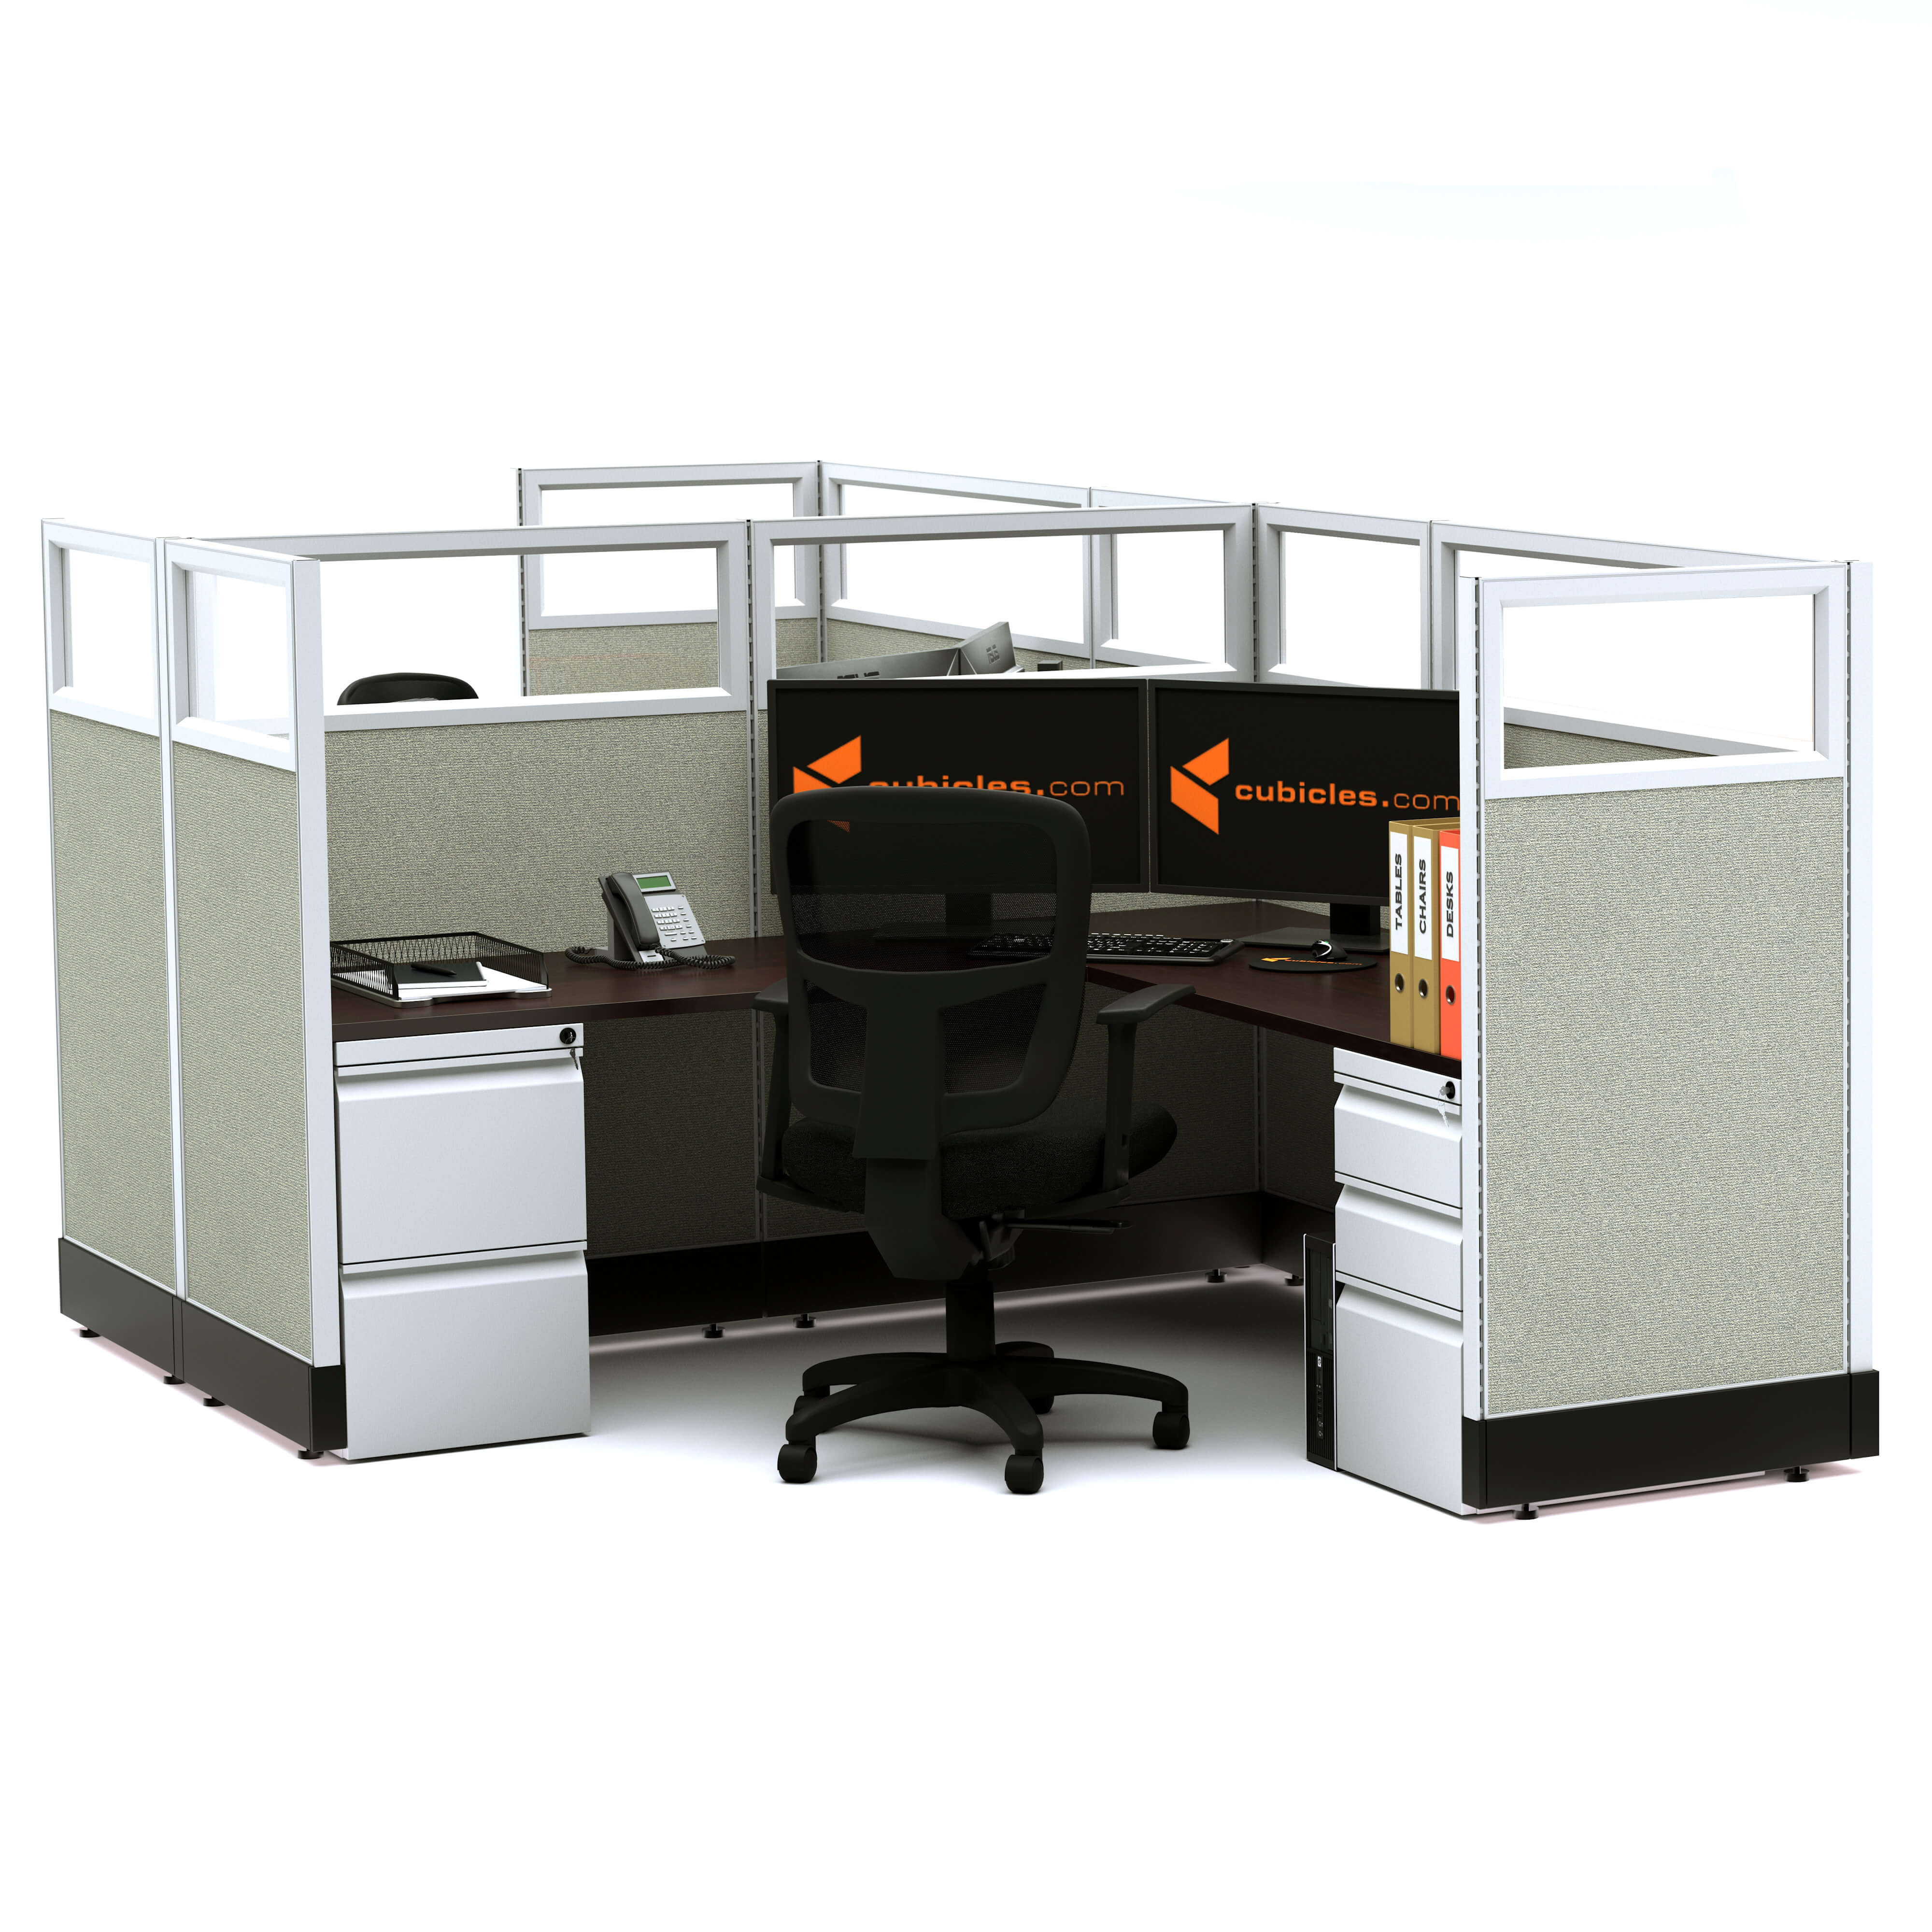 glass-office-cubicles-53h-2pack-cluster-powered.jpg